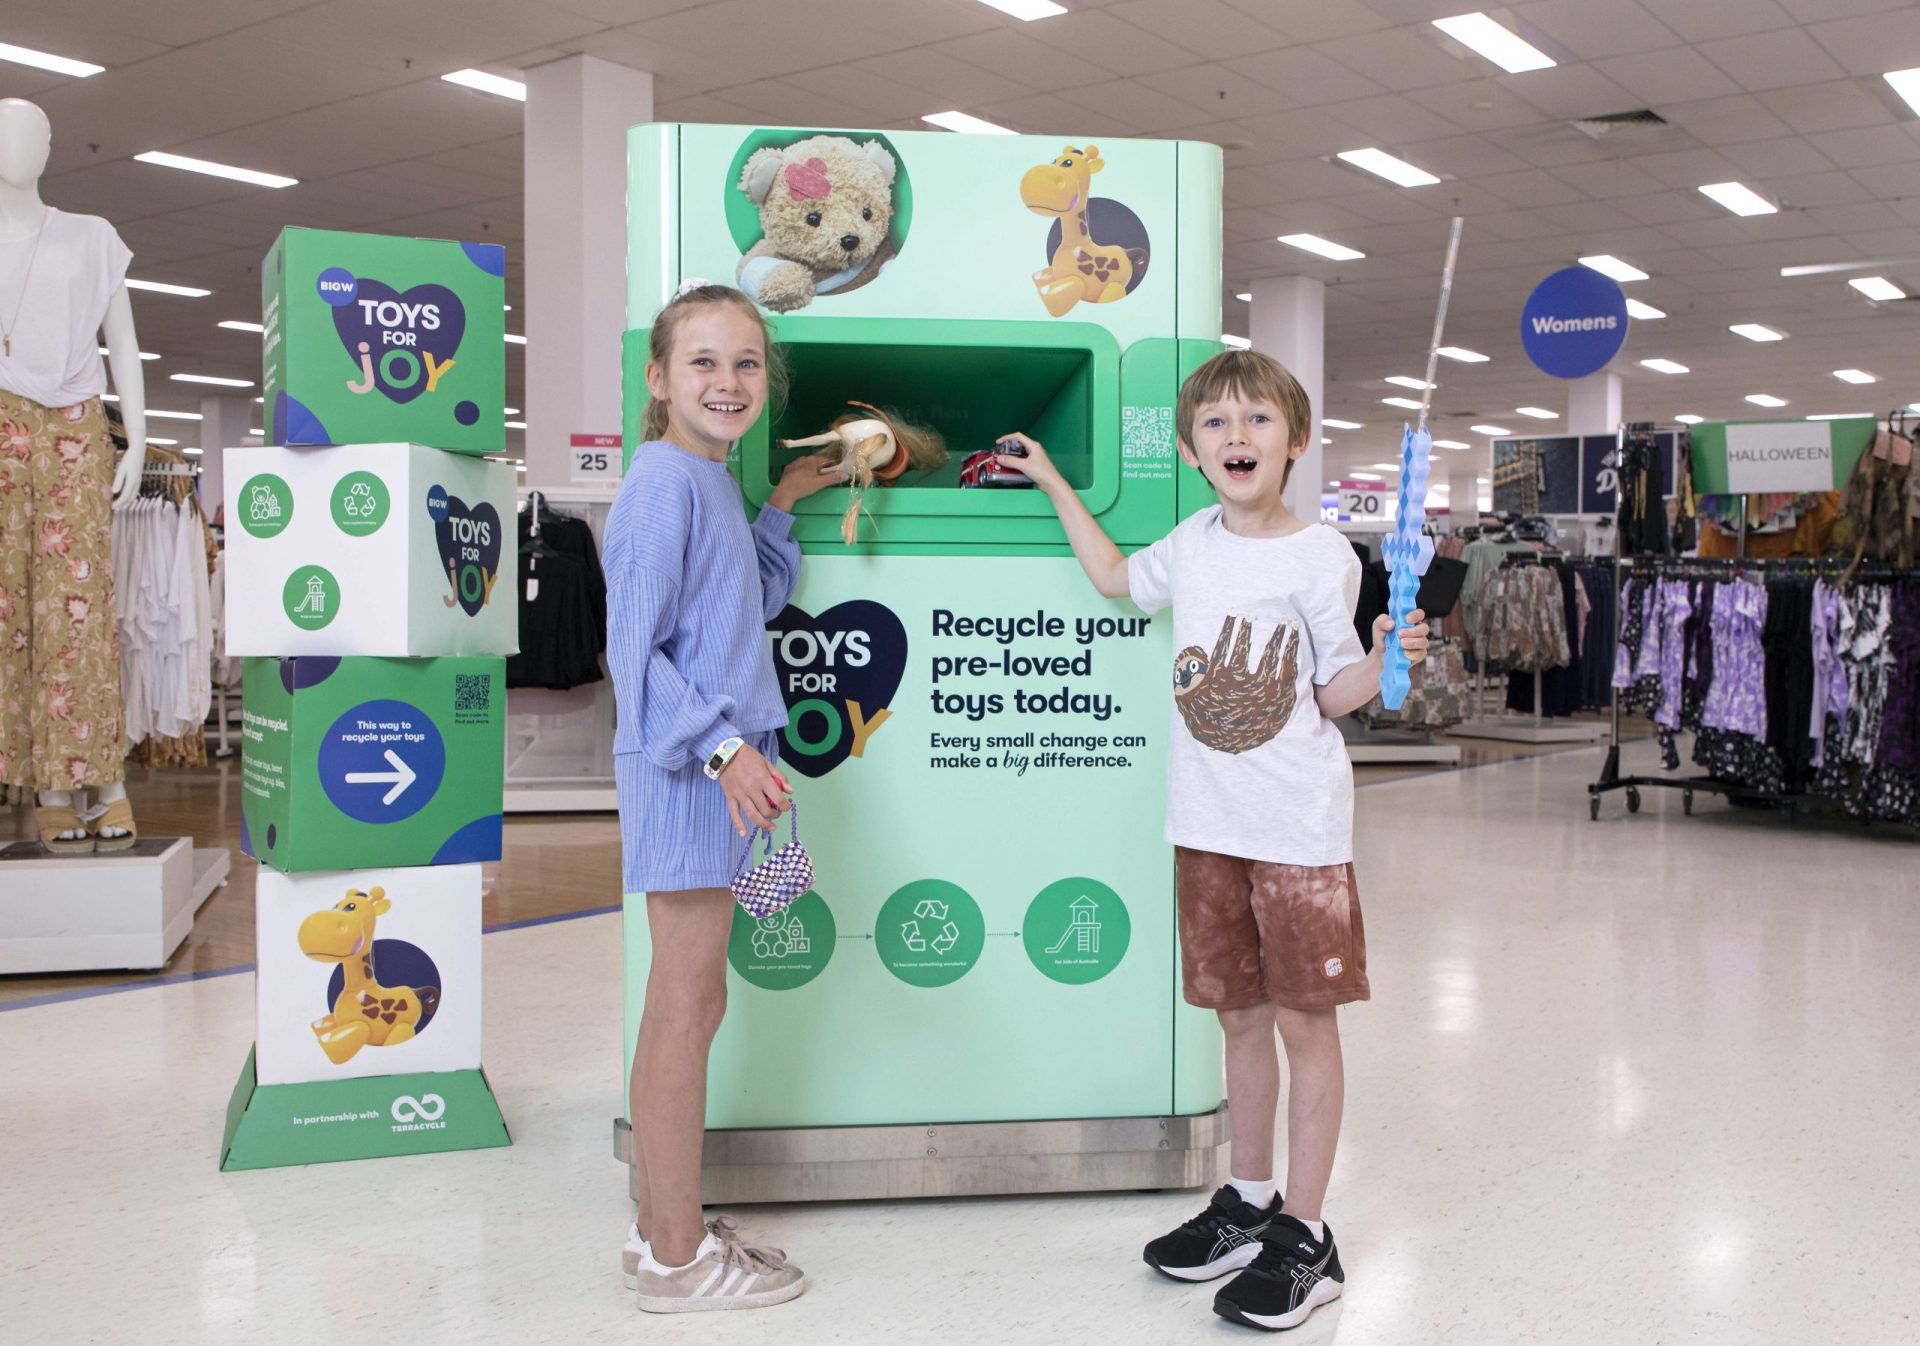 Big W launches toy recycling program through its entire network - Inside  Retail Australia